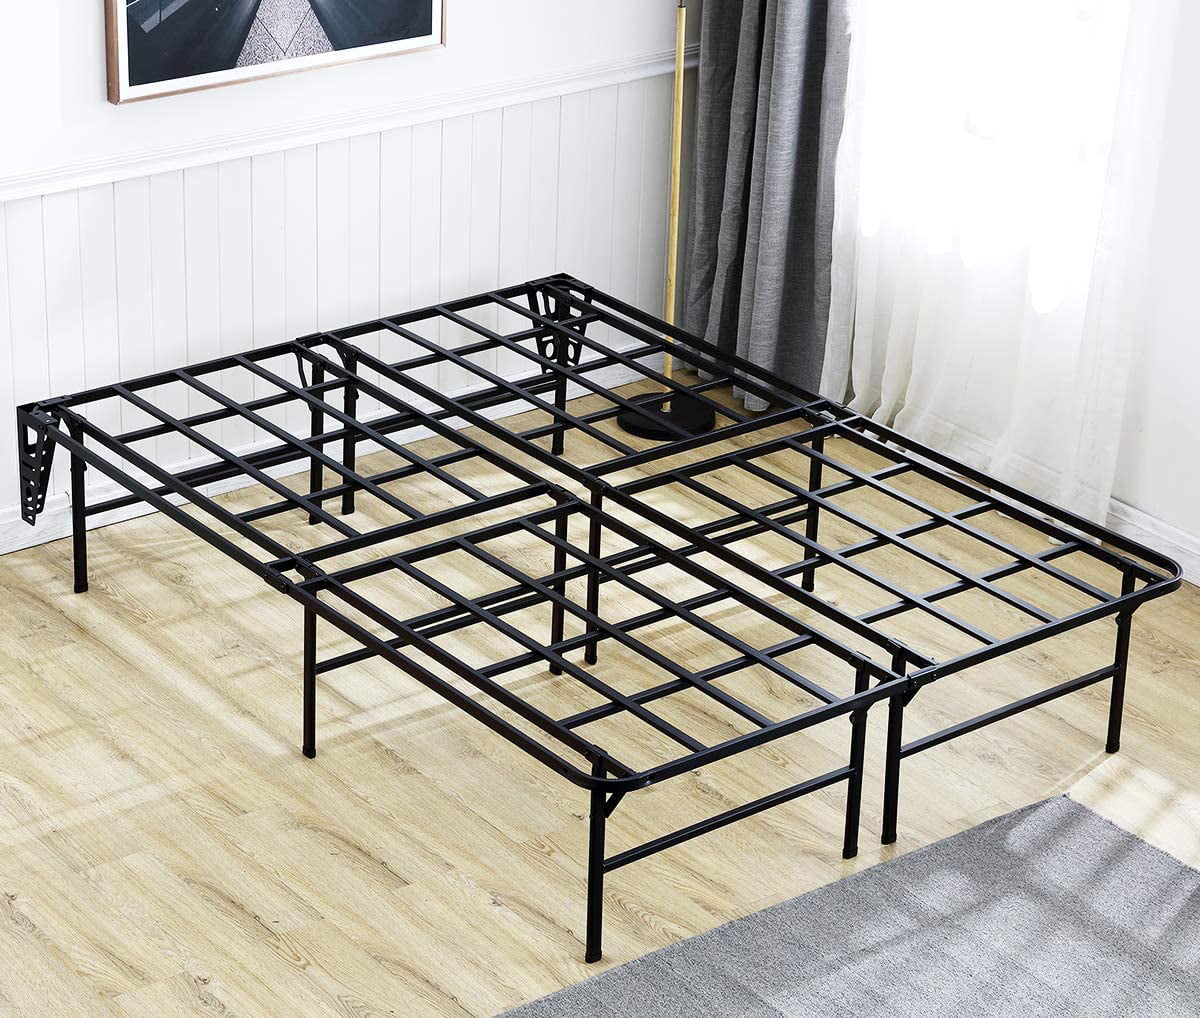 Tall Heavy Duty Platform Bed Frame, How Do You Attach A Headboard To Wooden Bed Frame